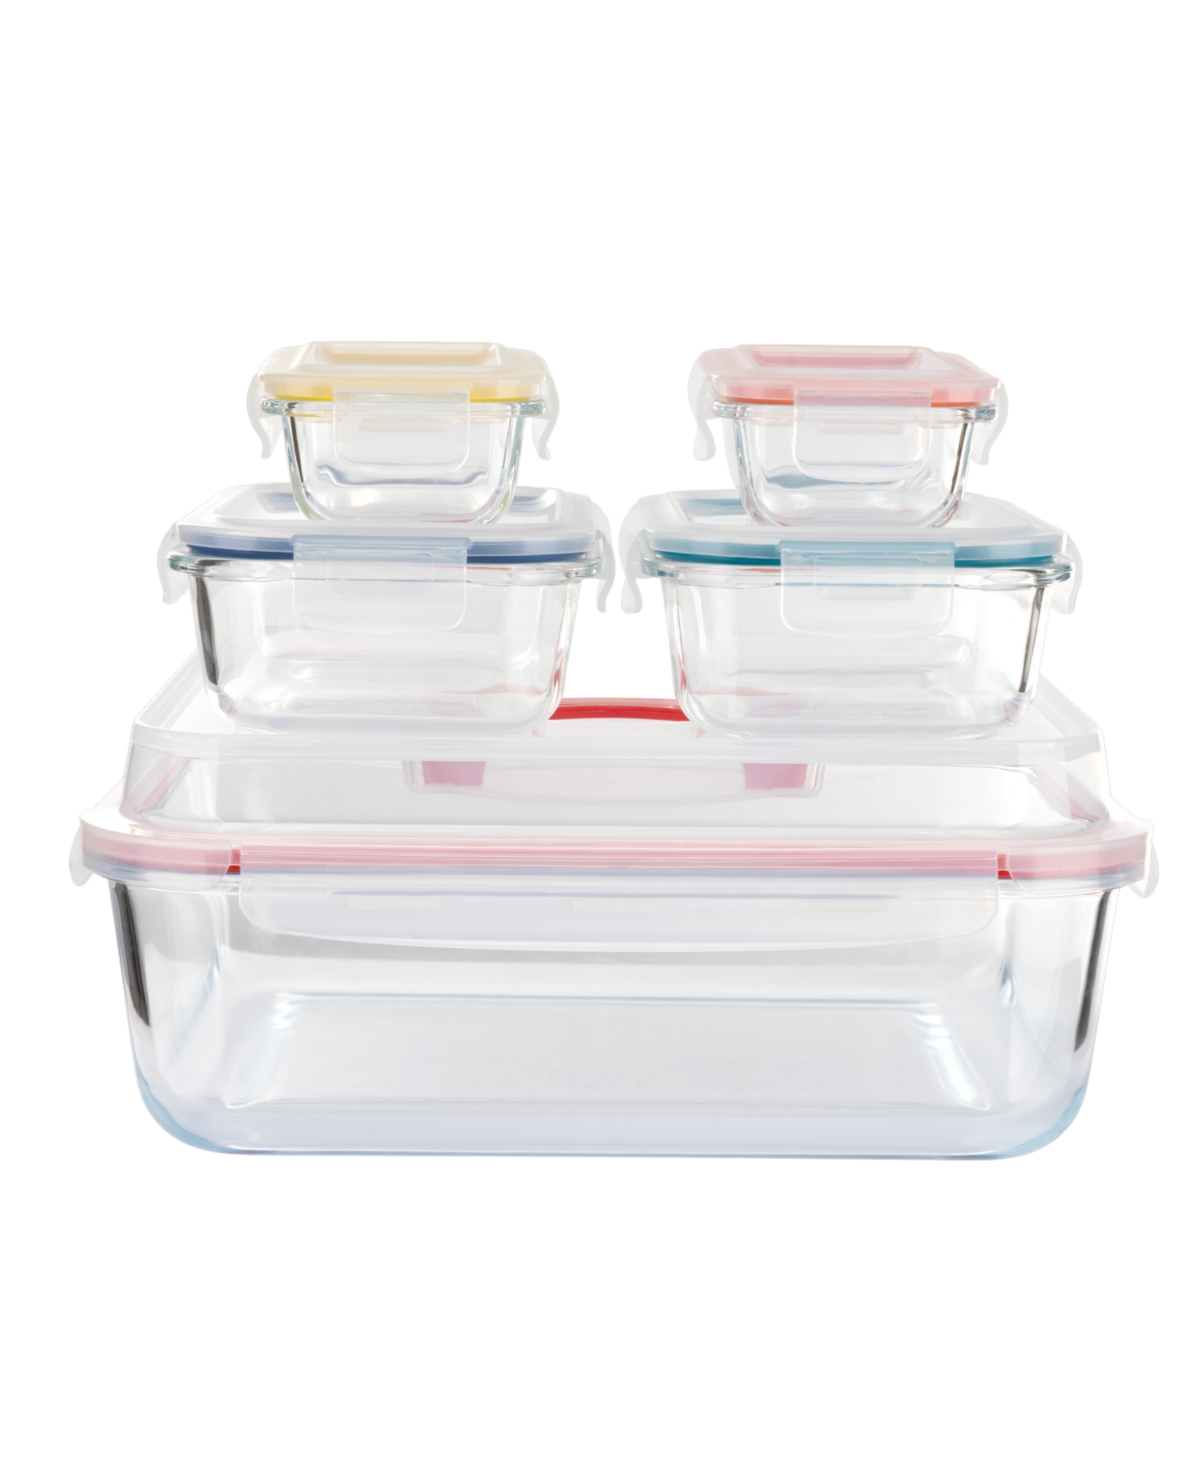 Genicook 10 Pc Nesting Mixing Storage Set, W Lock Down Lids And Carry Handle In Multicolor